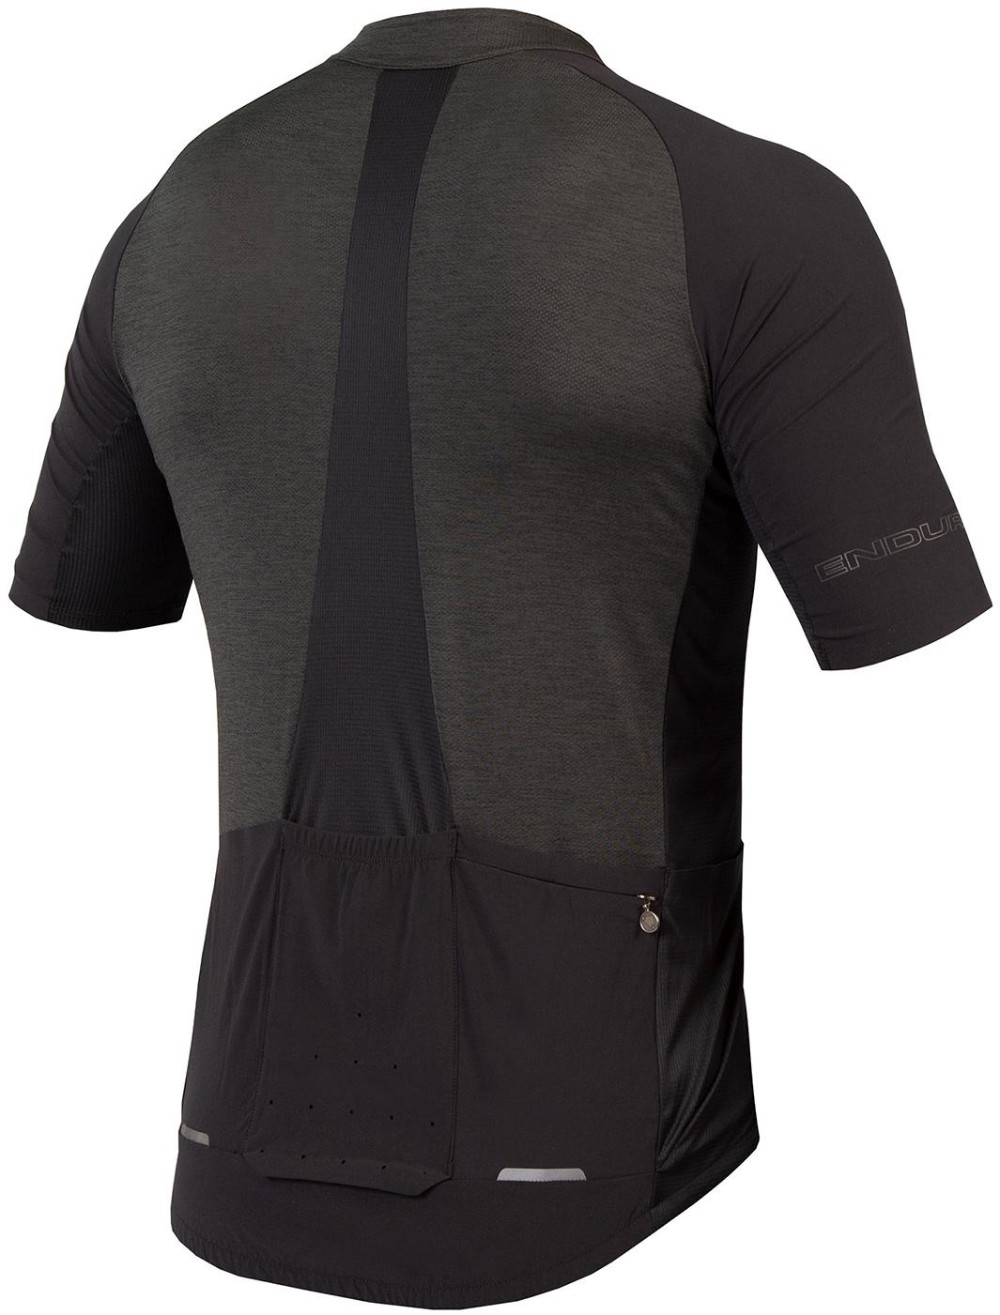 GV500 Reiver Short Sleeve Cycling Jersey image 1